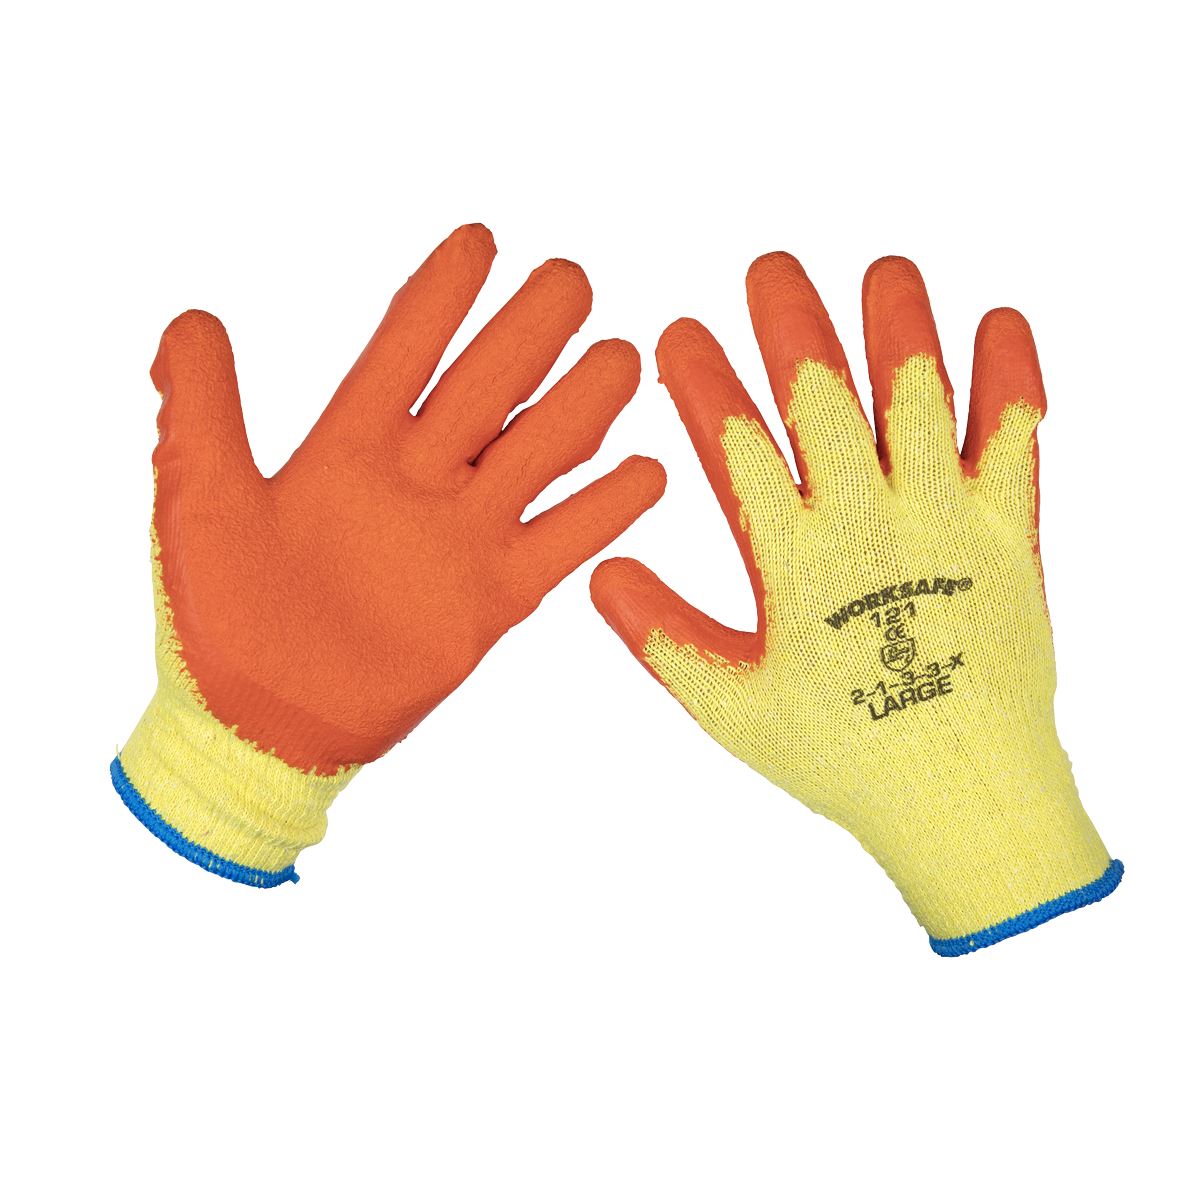 Worksafe by Sealey Super Grip Knitted Gloves Latex Palm (Large) - Pack of 6 Pairs